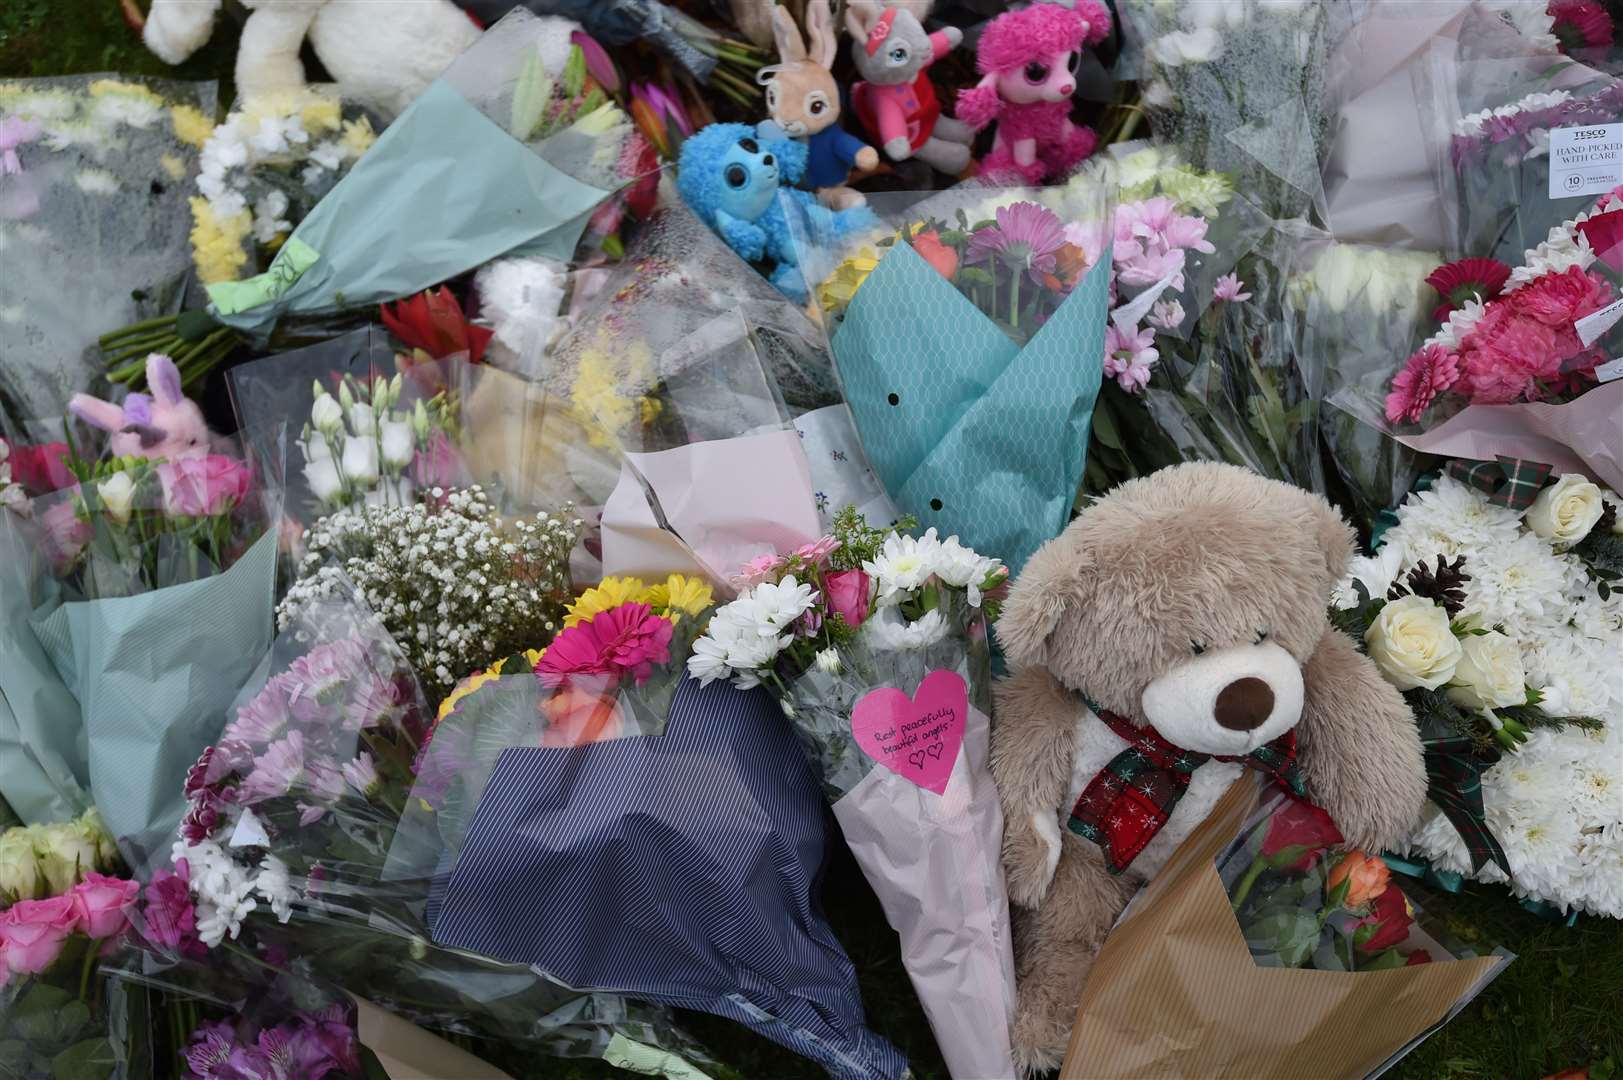 Dozens of floral tributes and soft toys have been left at the scene (Joe Giddens/PA)